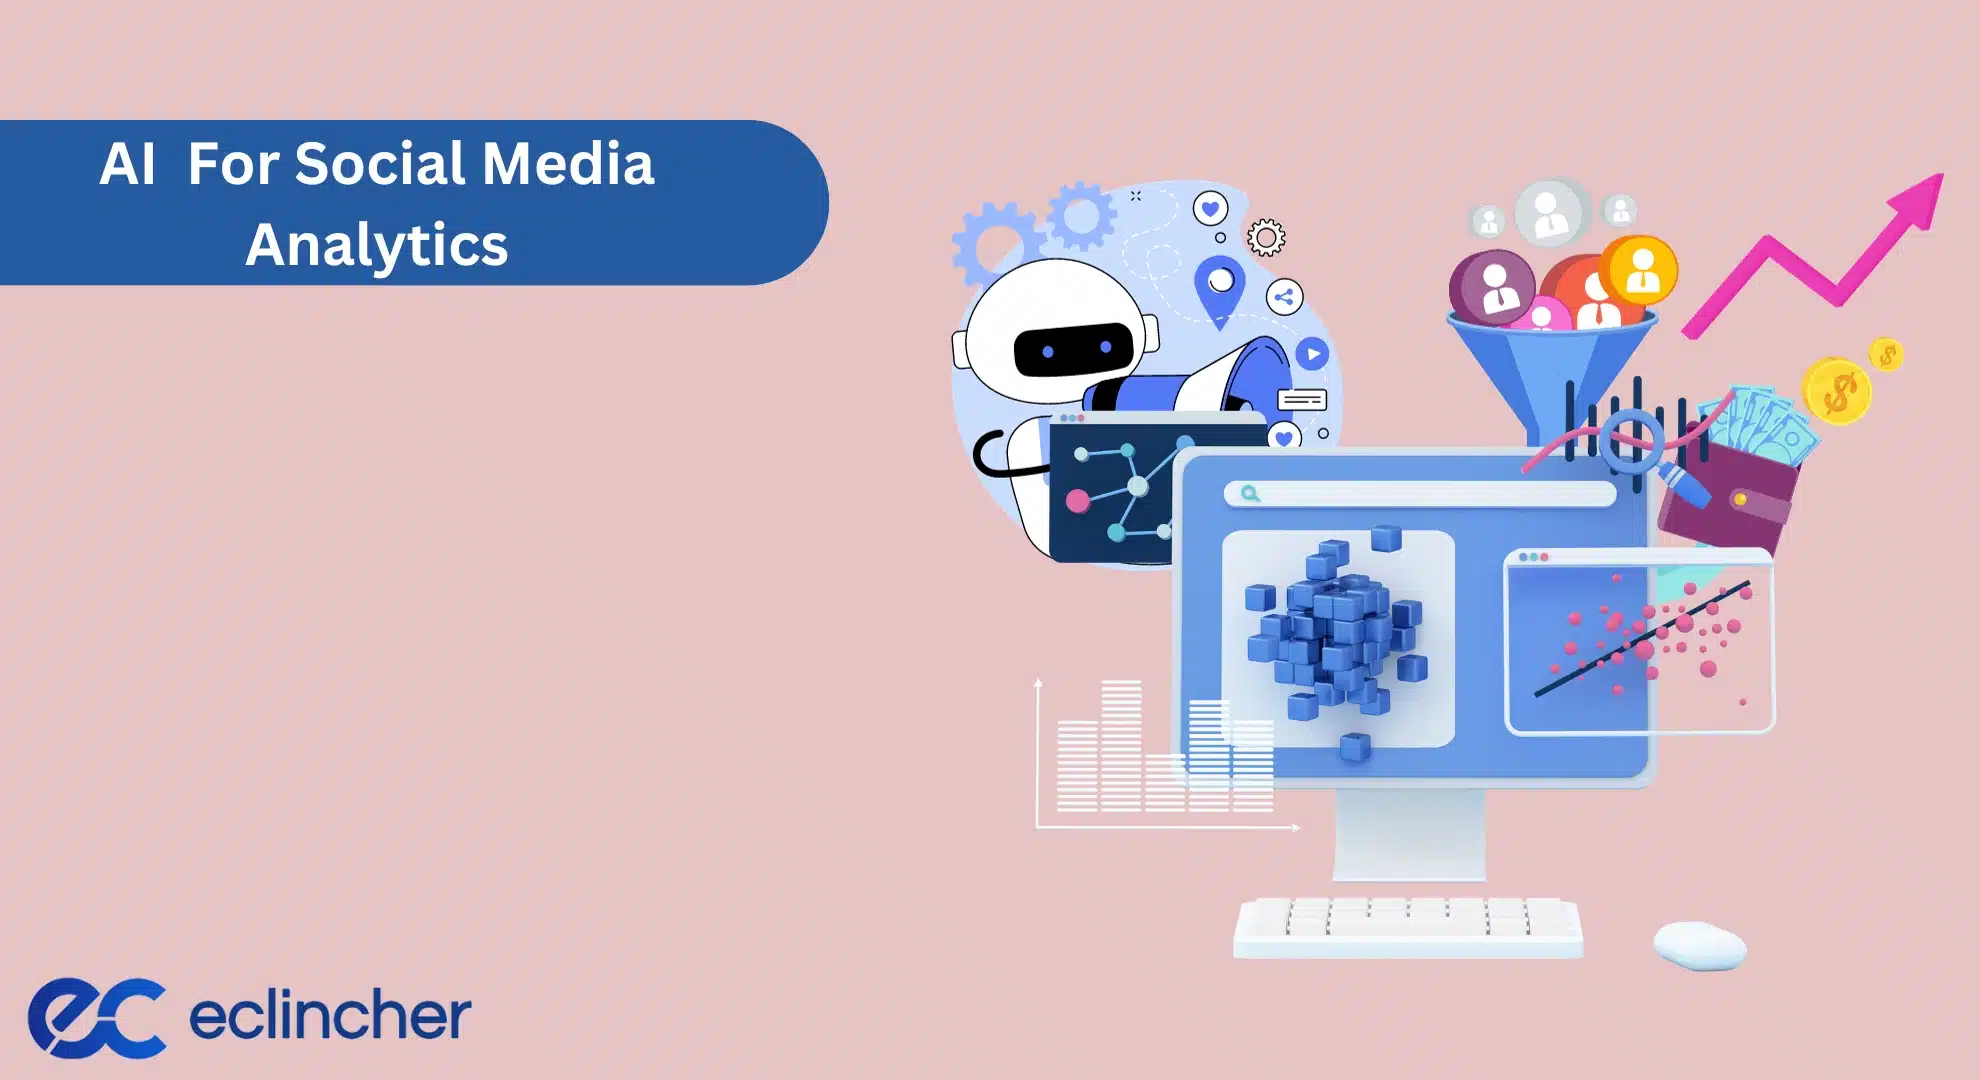 How Can You Generally Use An AI Tool For Social Media Analytics